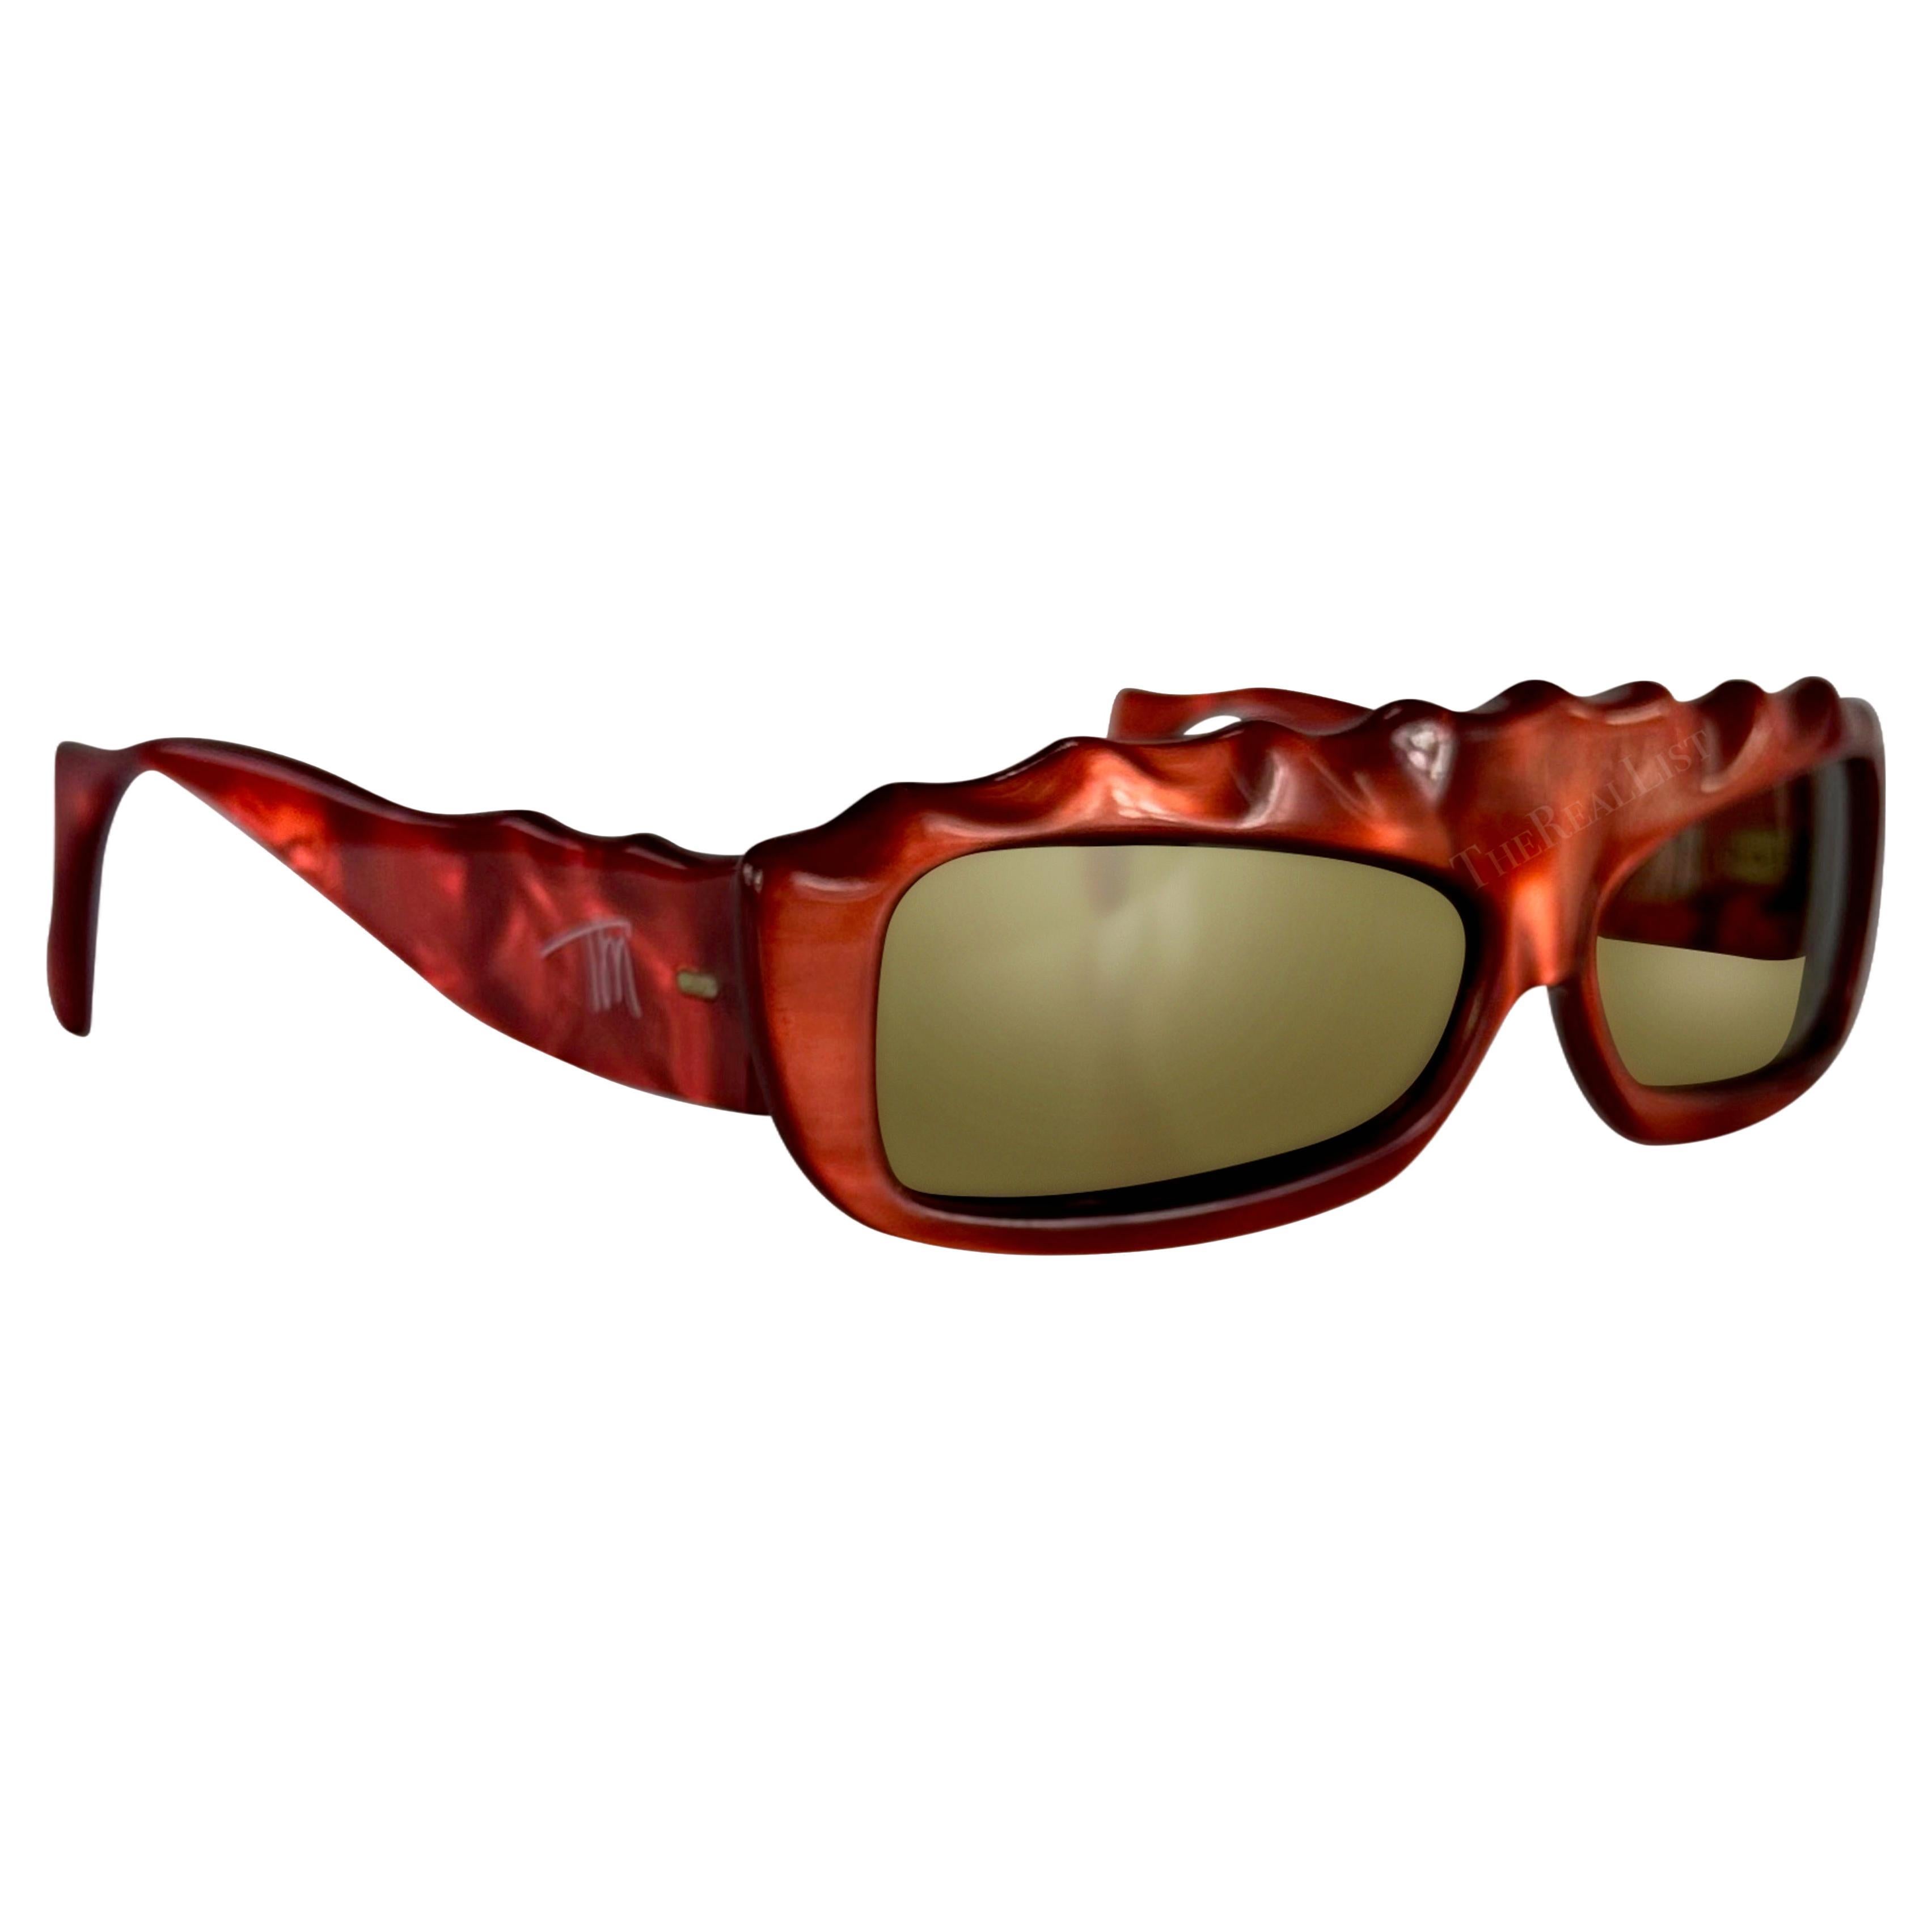 S/S 1979 Thierry Mugler Red Opalescent Red Sculpted Rectangular Sunglasses For Sale 6